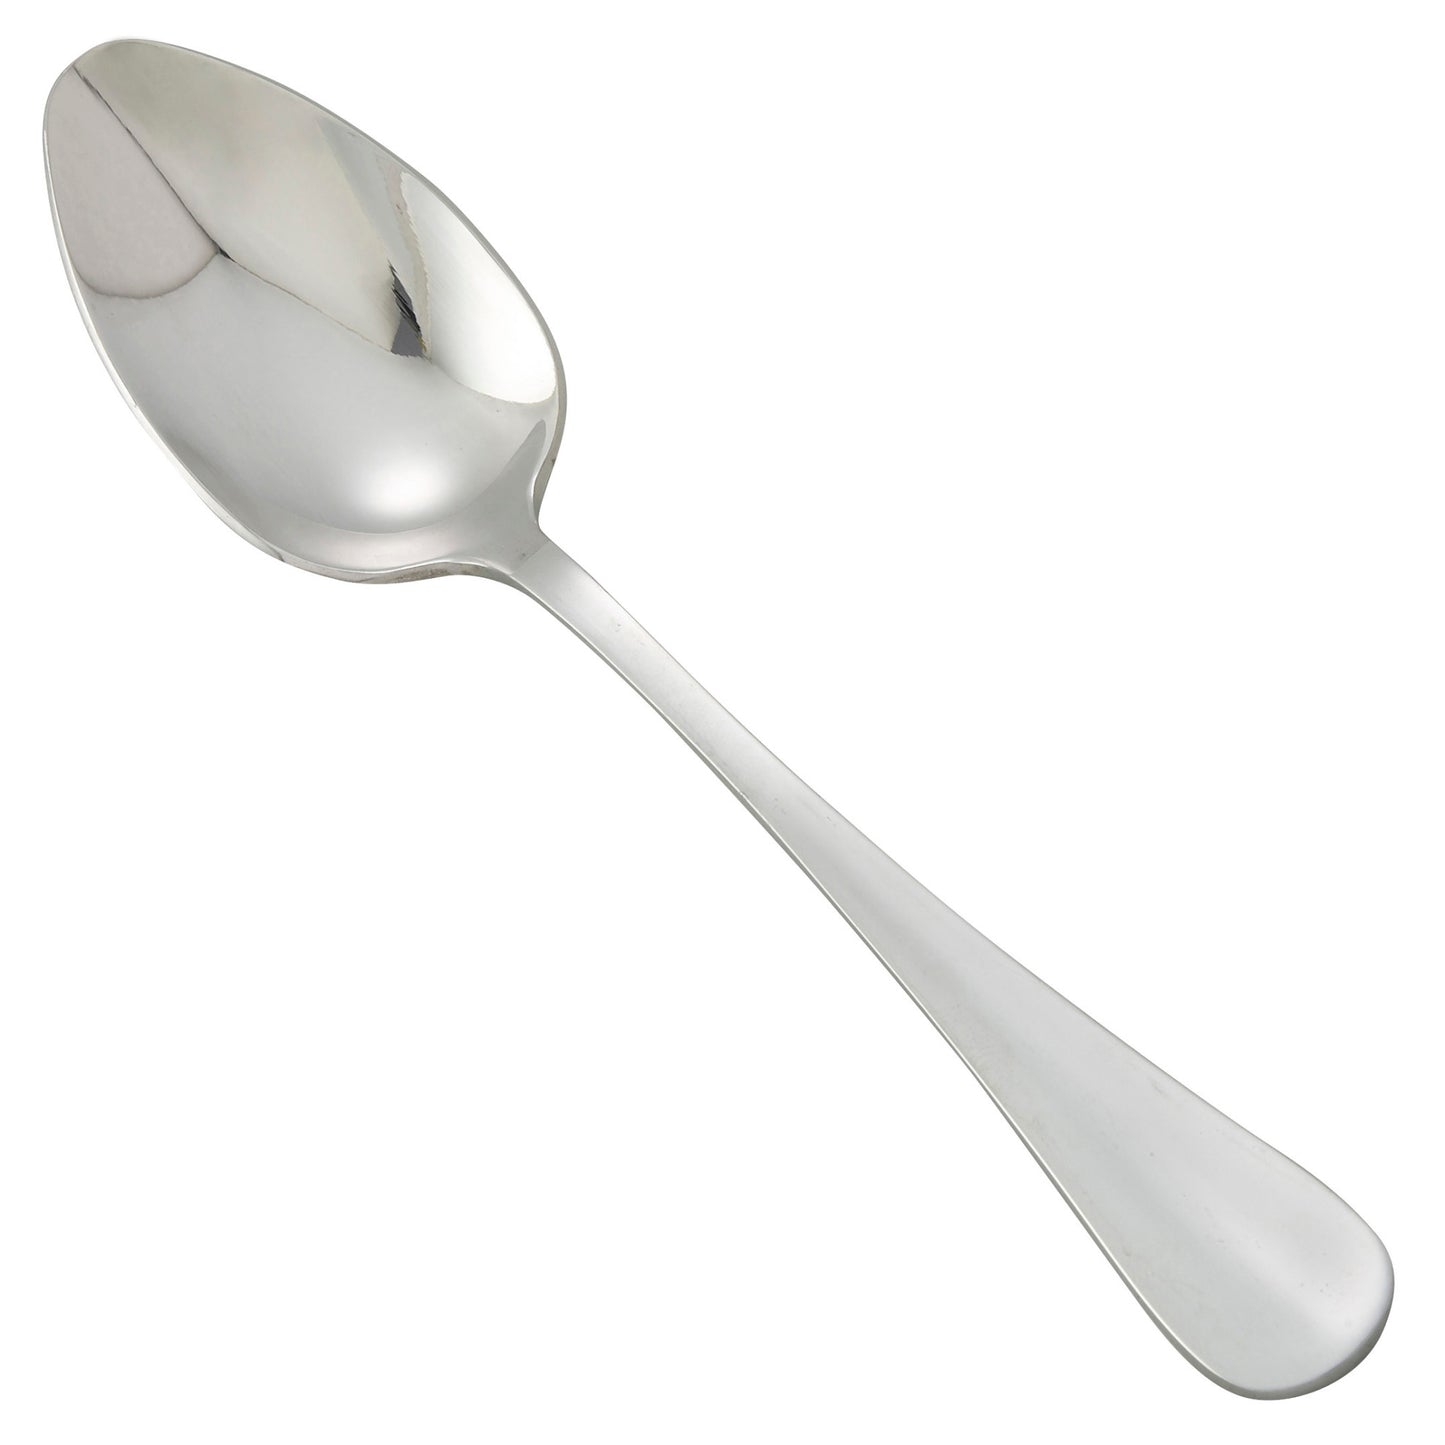 0034-10 - Stanford Tablespoon, 18/8 Extra Heavyweight